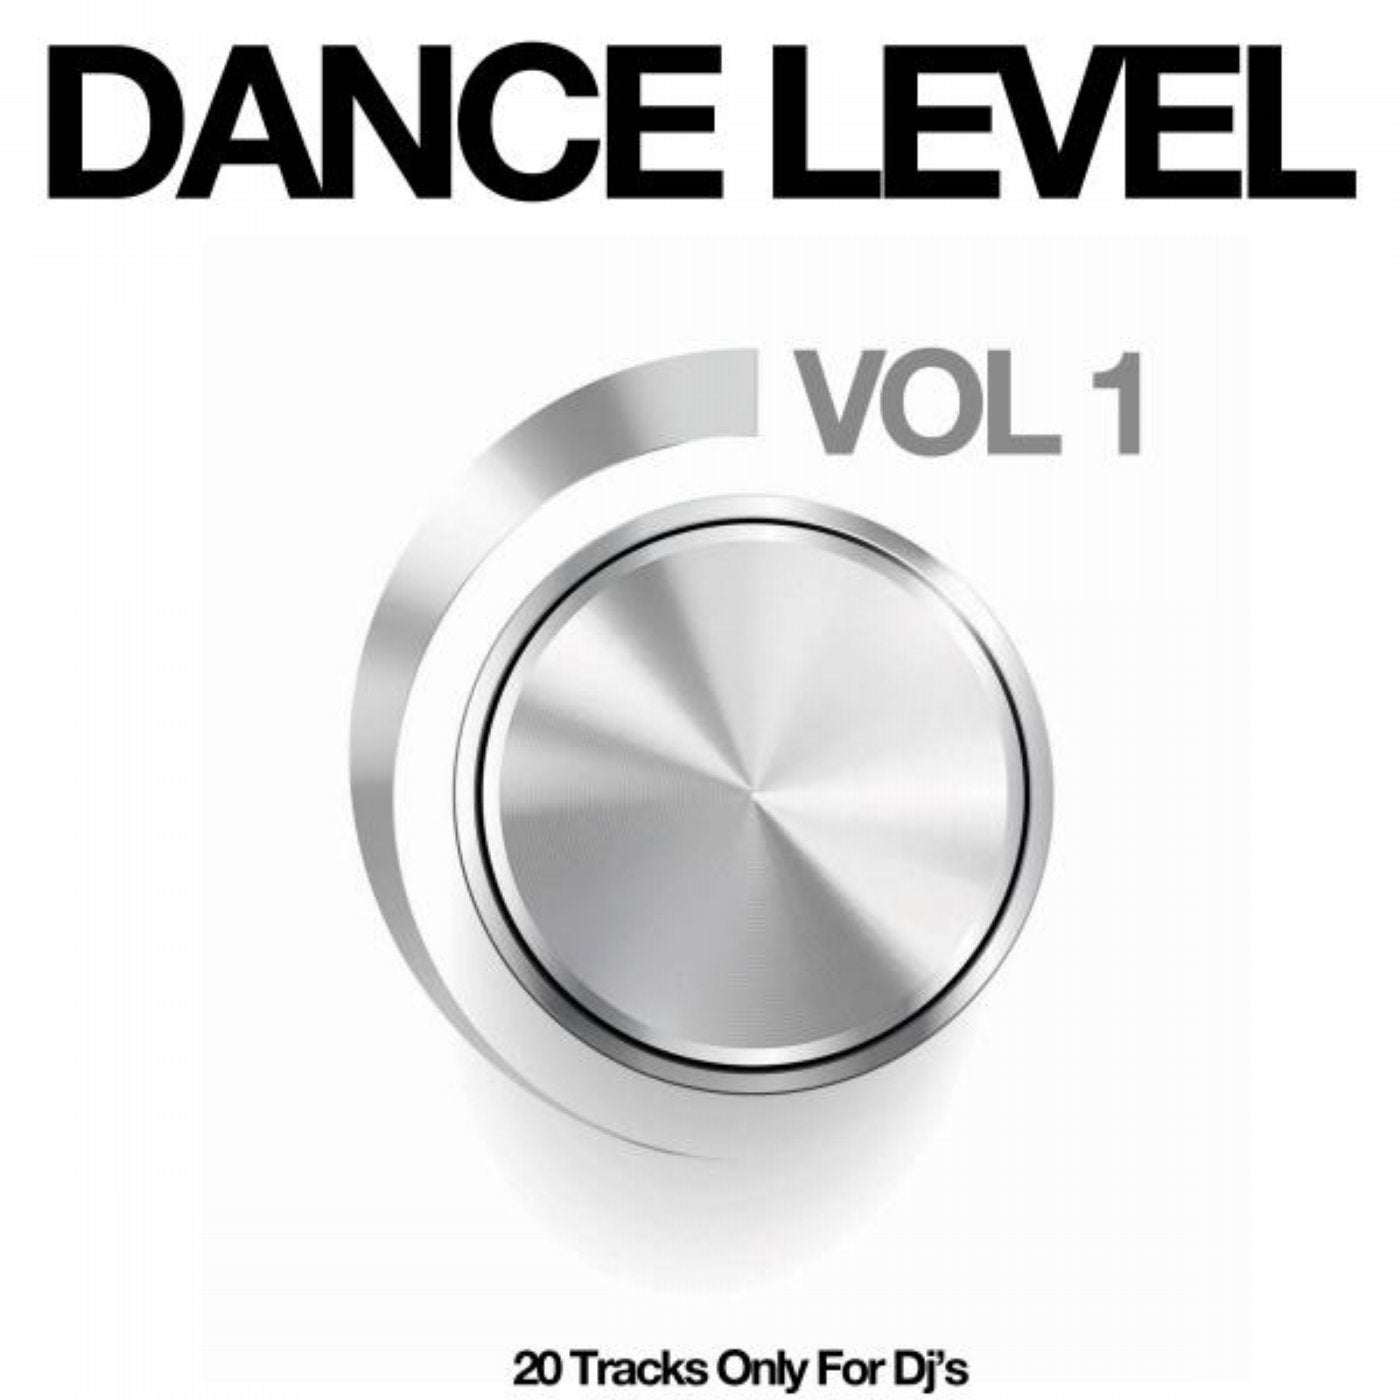 Dance Level, Vol. 1 (20 Tracks Only for DJ's)